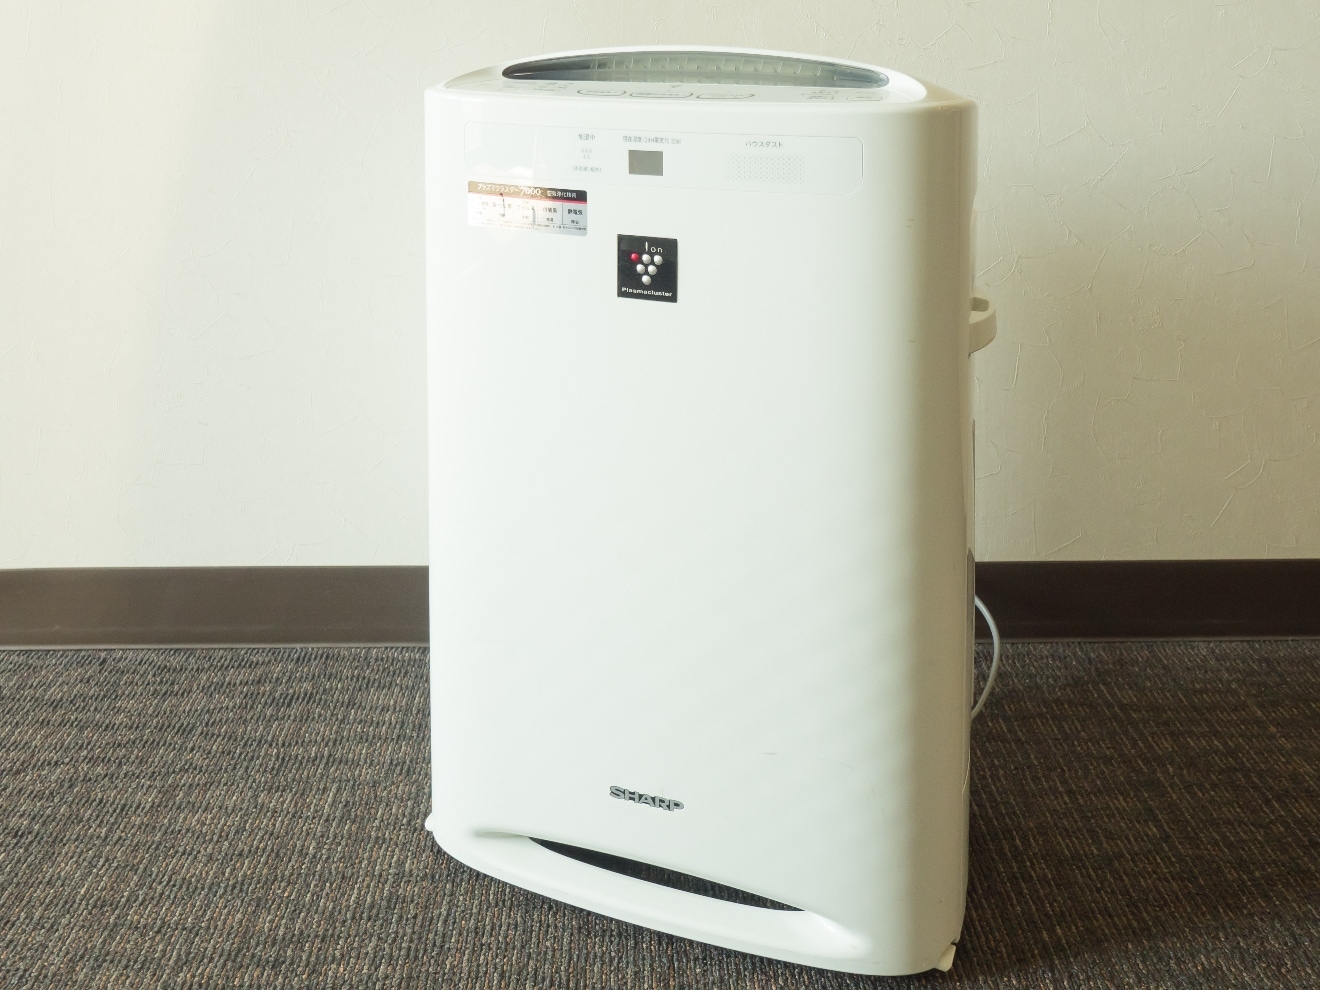 All guest rooms are equipped with an air purifier with a humidifying function. Measures against dryness and odors are perfect!